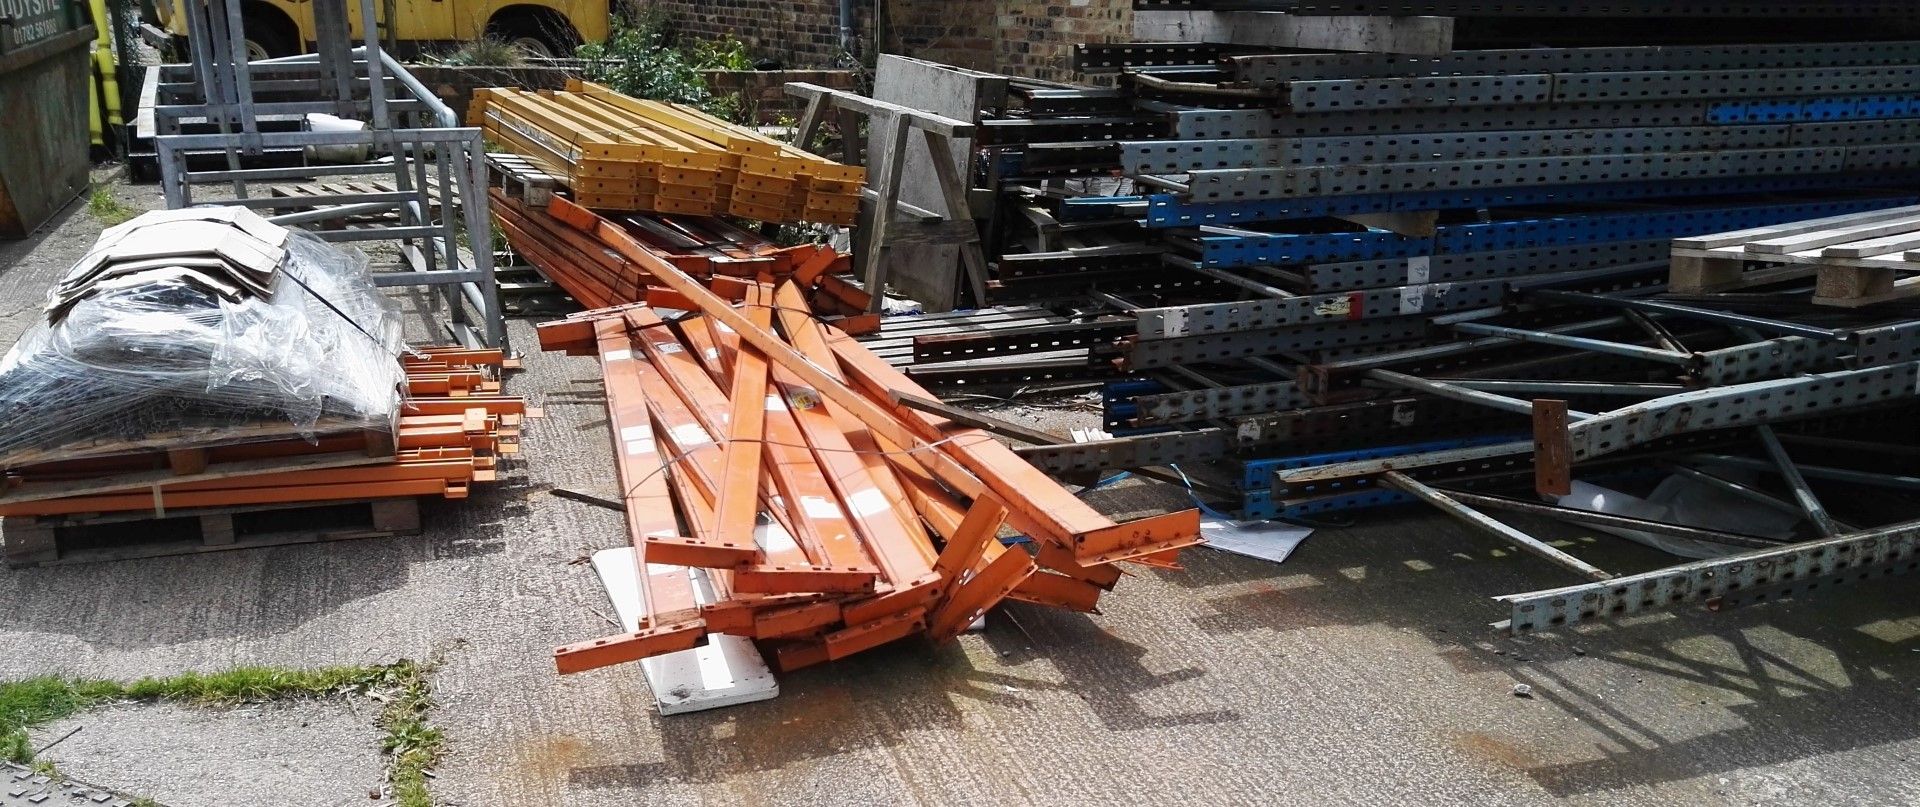 1 x Large Assortment of Industrial Racking - CL185 - Ref: DRRCK - Location: Stoke-on-Trent ST3 - Image 16 of 16